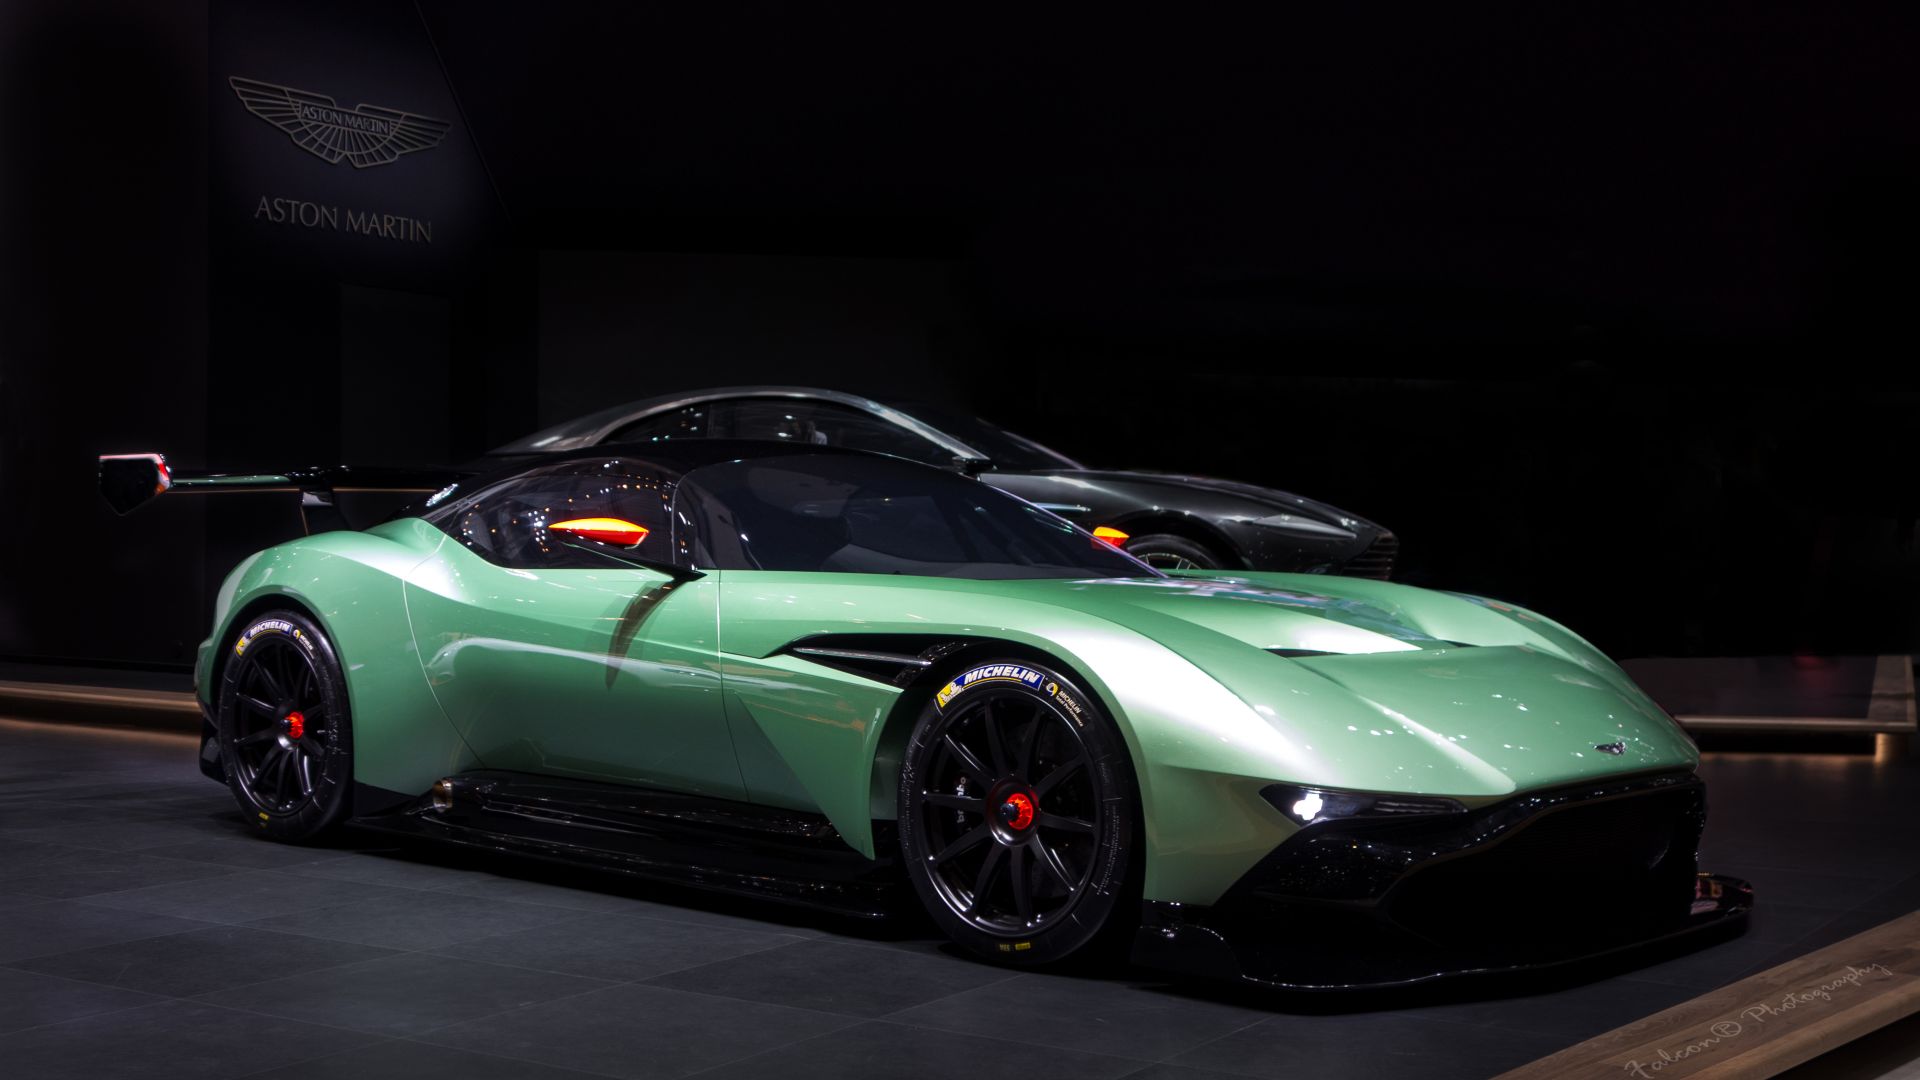 Aston Martin Vulcan, coupe, track only, green. (horizontal)